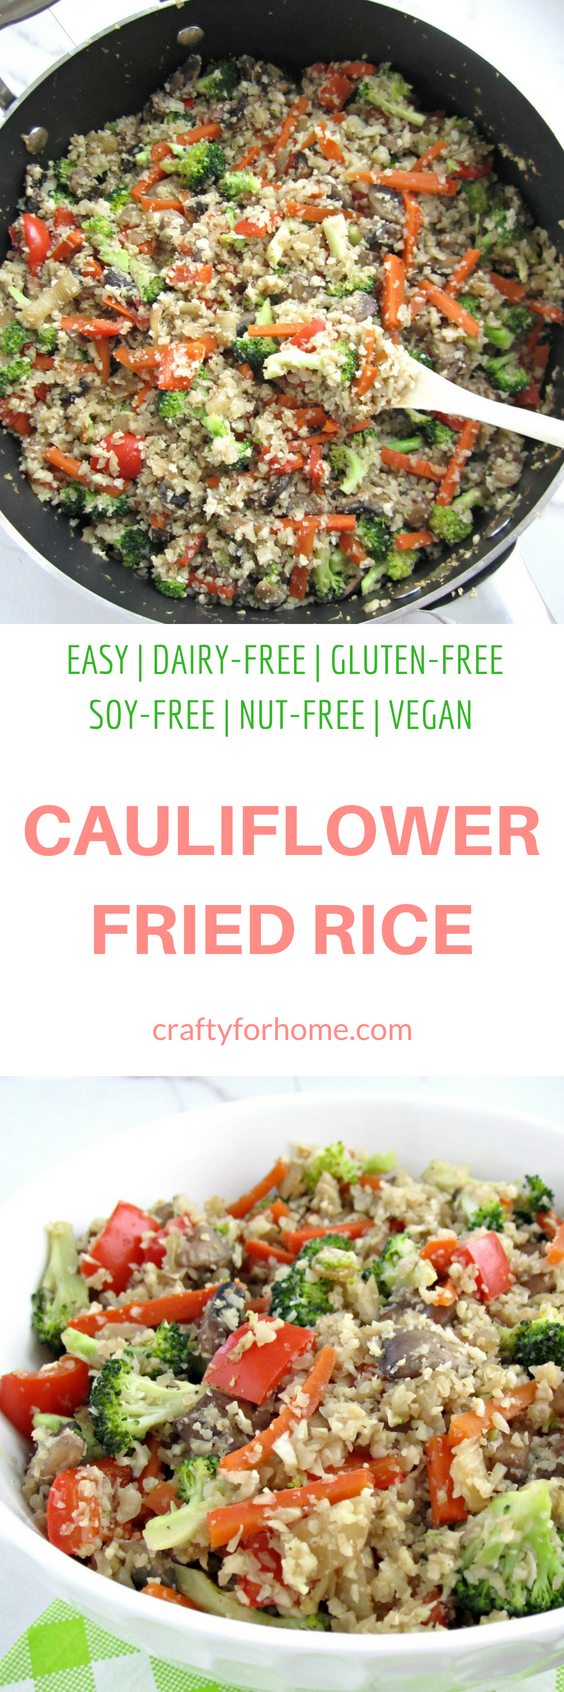 Easy cauliflower fried rice recipe for a healthy vegan inspired meals and loaded with vegetables. Healthy, soy-free, dairy-free, gluten-free, nut-free, vegetarian, vegan. #cauliflowerrice #vegan #glutenfree for full recipe on craftyforhome.com